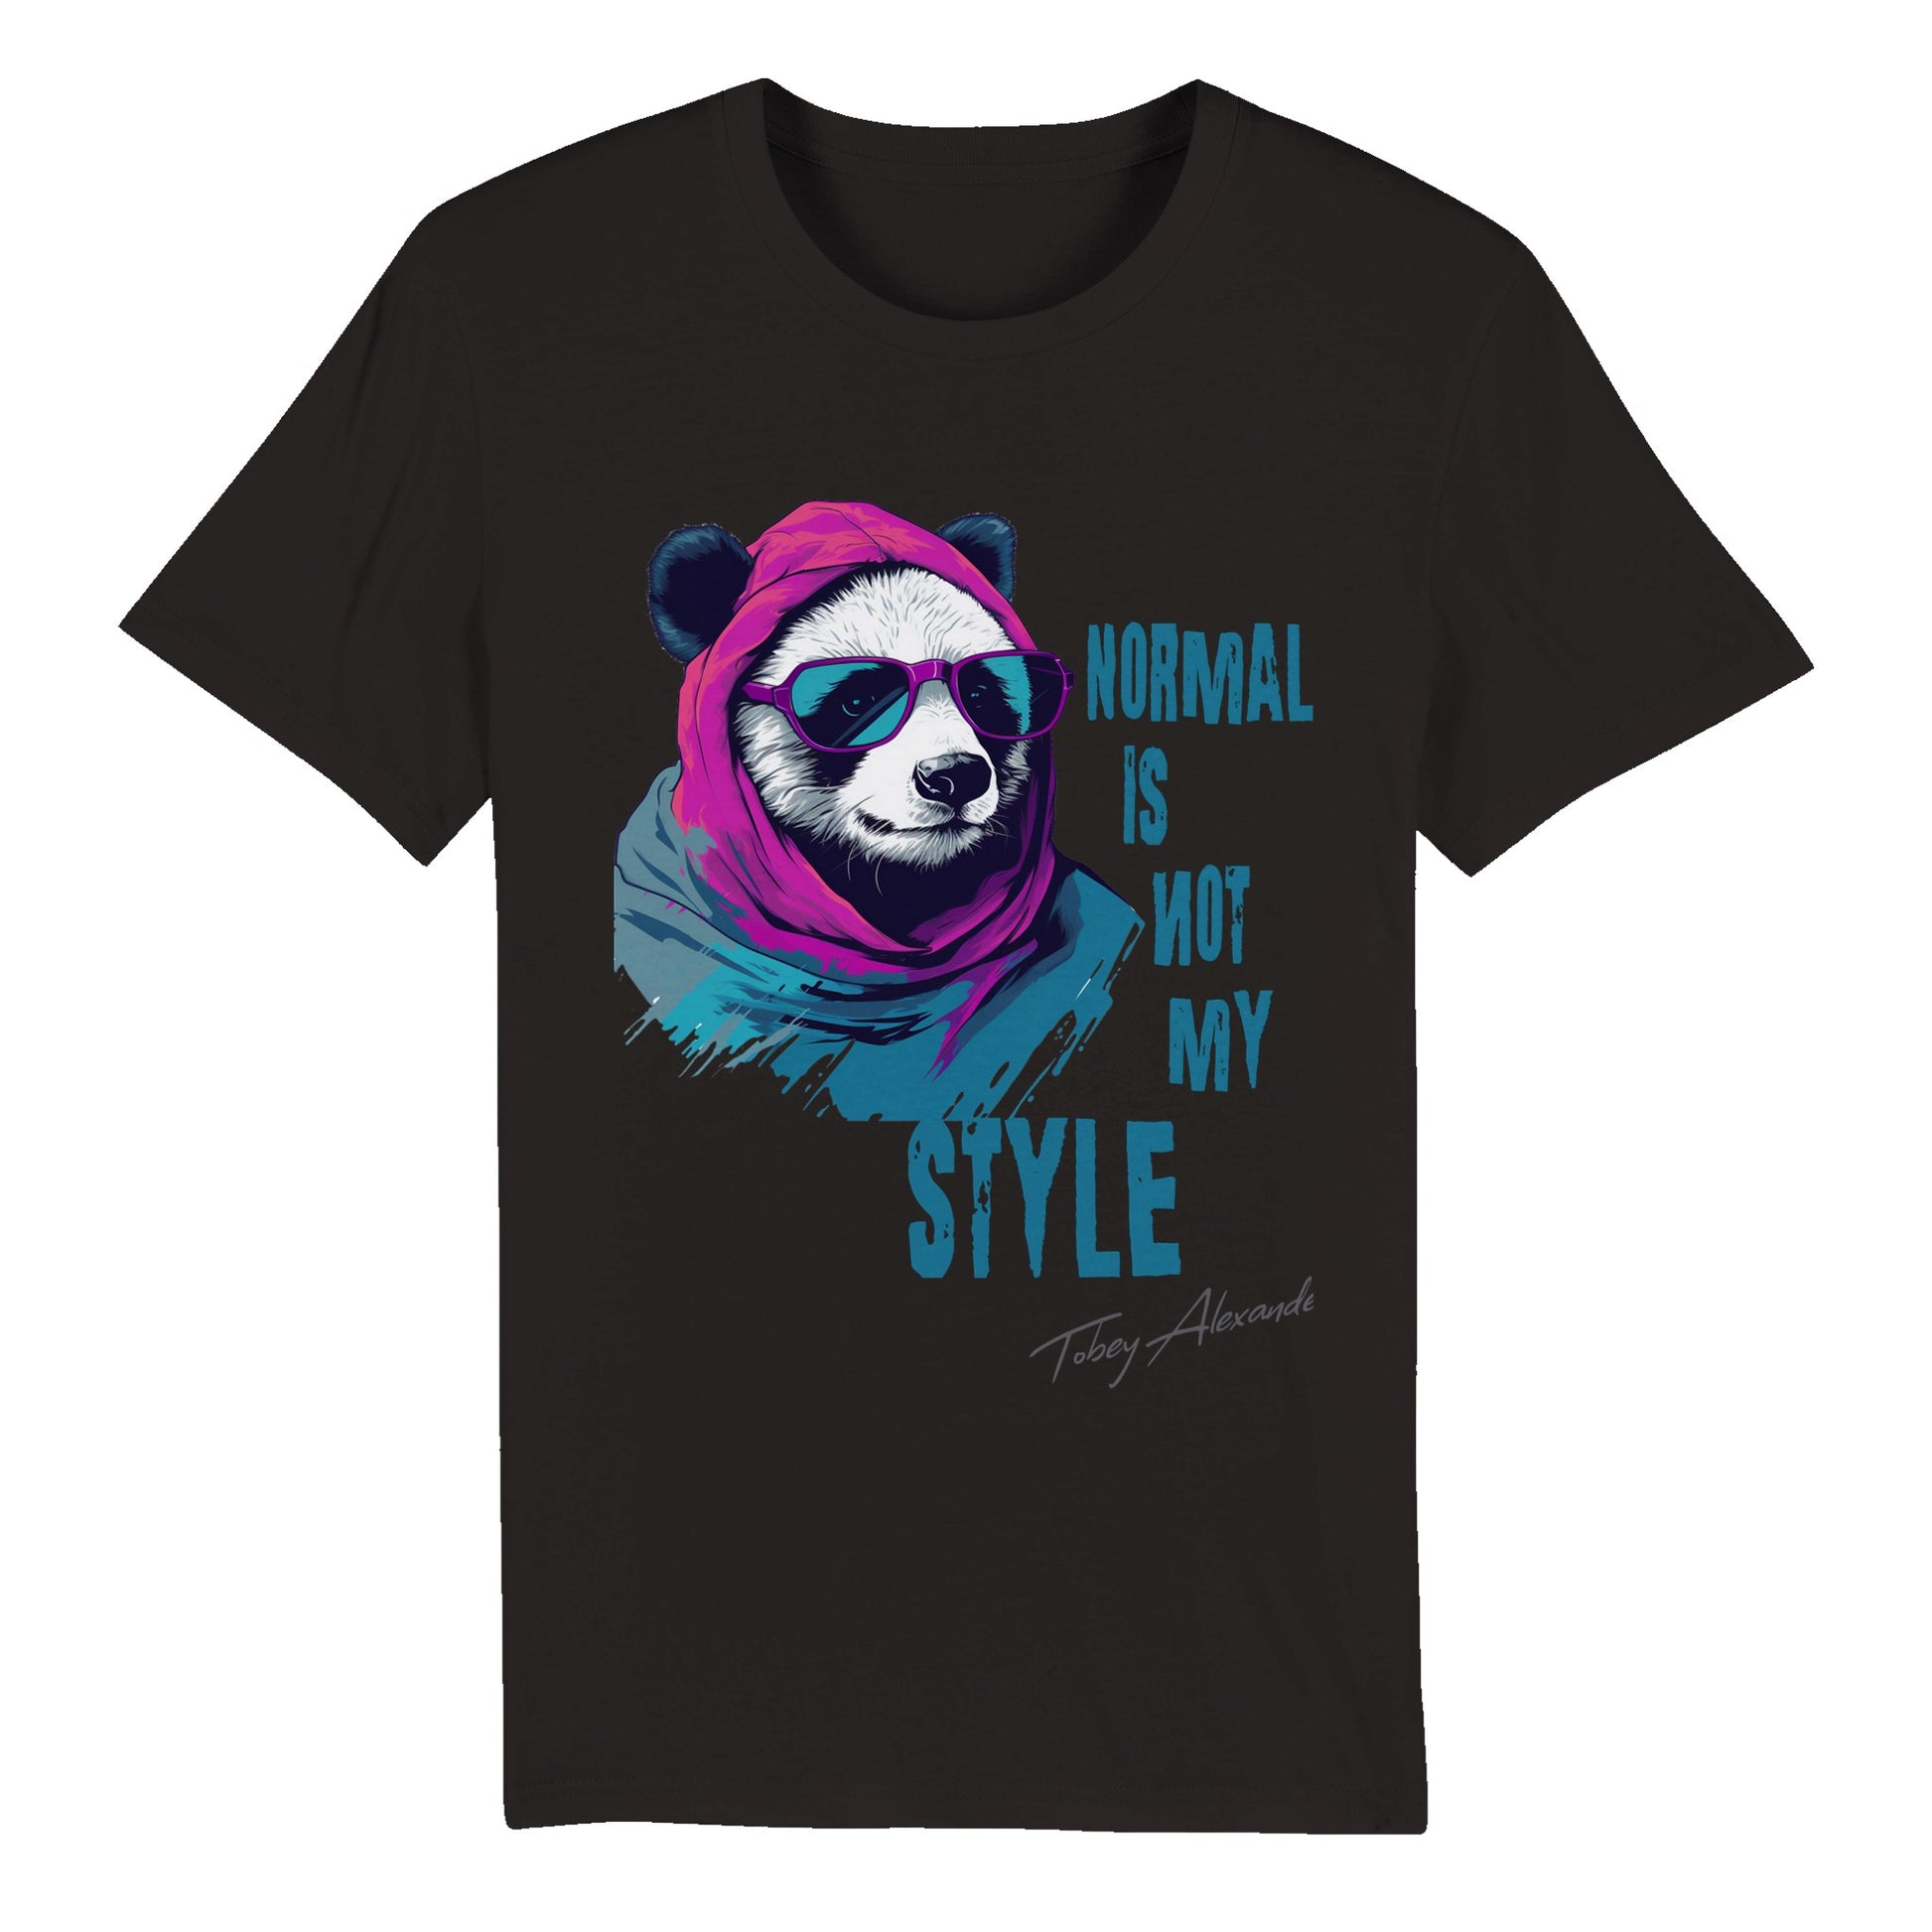 Defy Normalcy: 'Normal Is Not My Style' Organic Unisex Crewneck Tee Clothes By Tobey Alexander